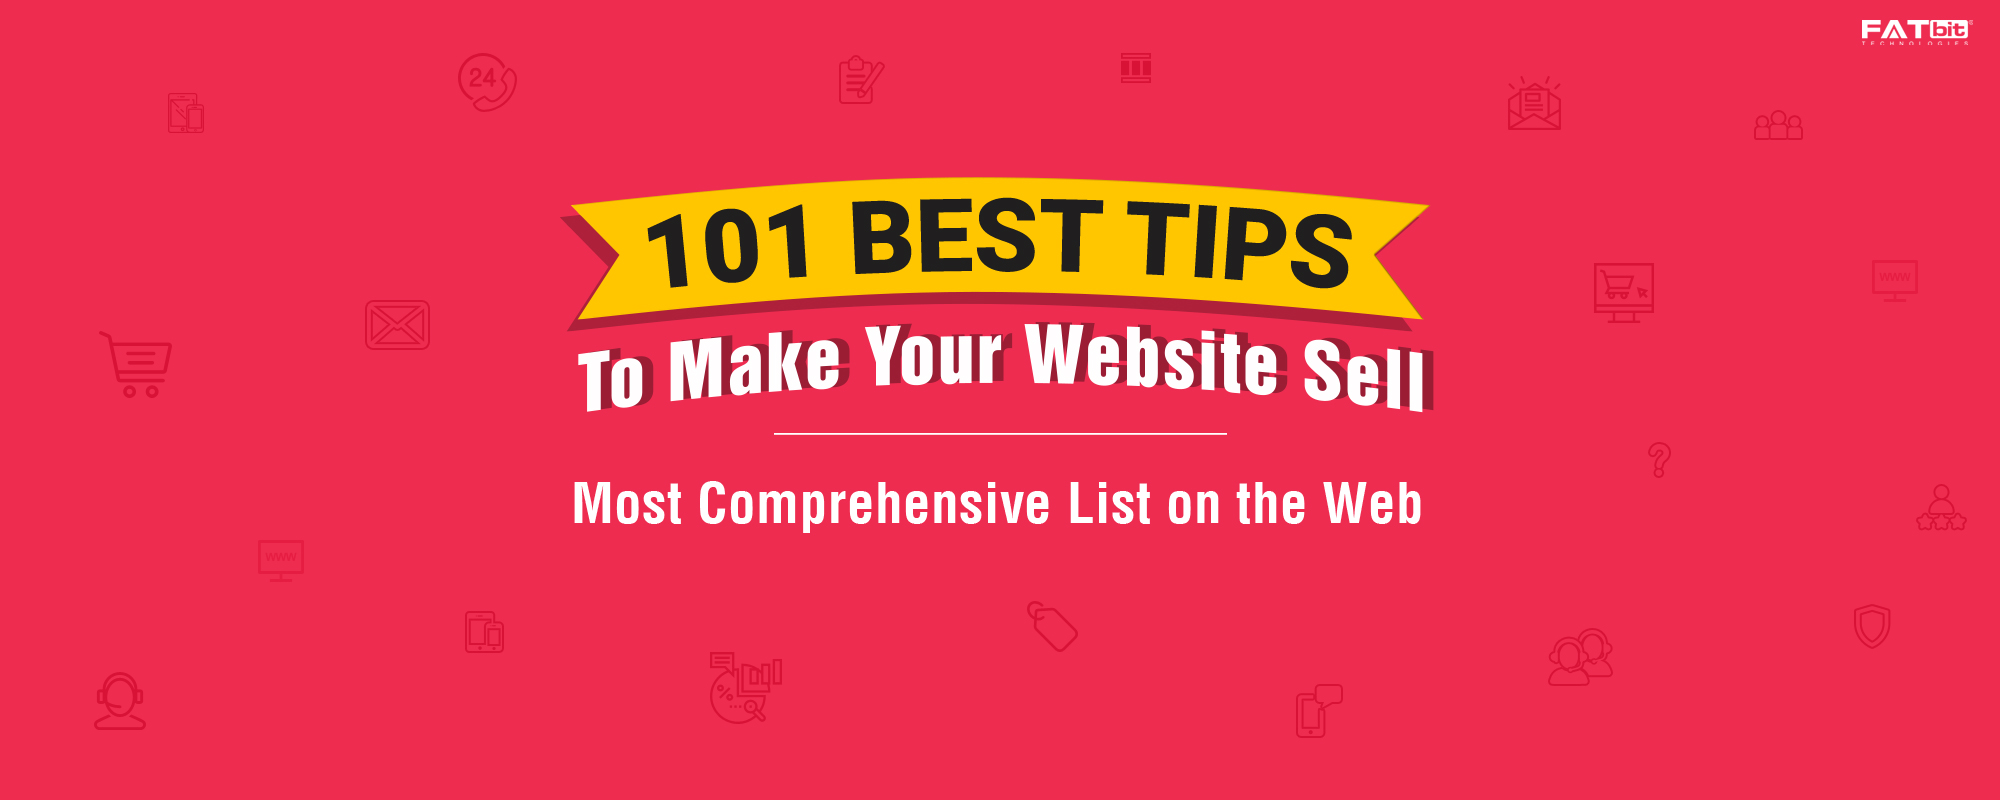 101 Actionable Best Tips: How To Make Your Website Sell